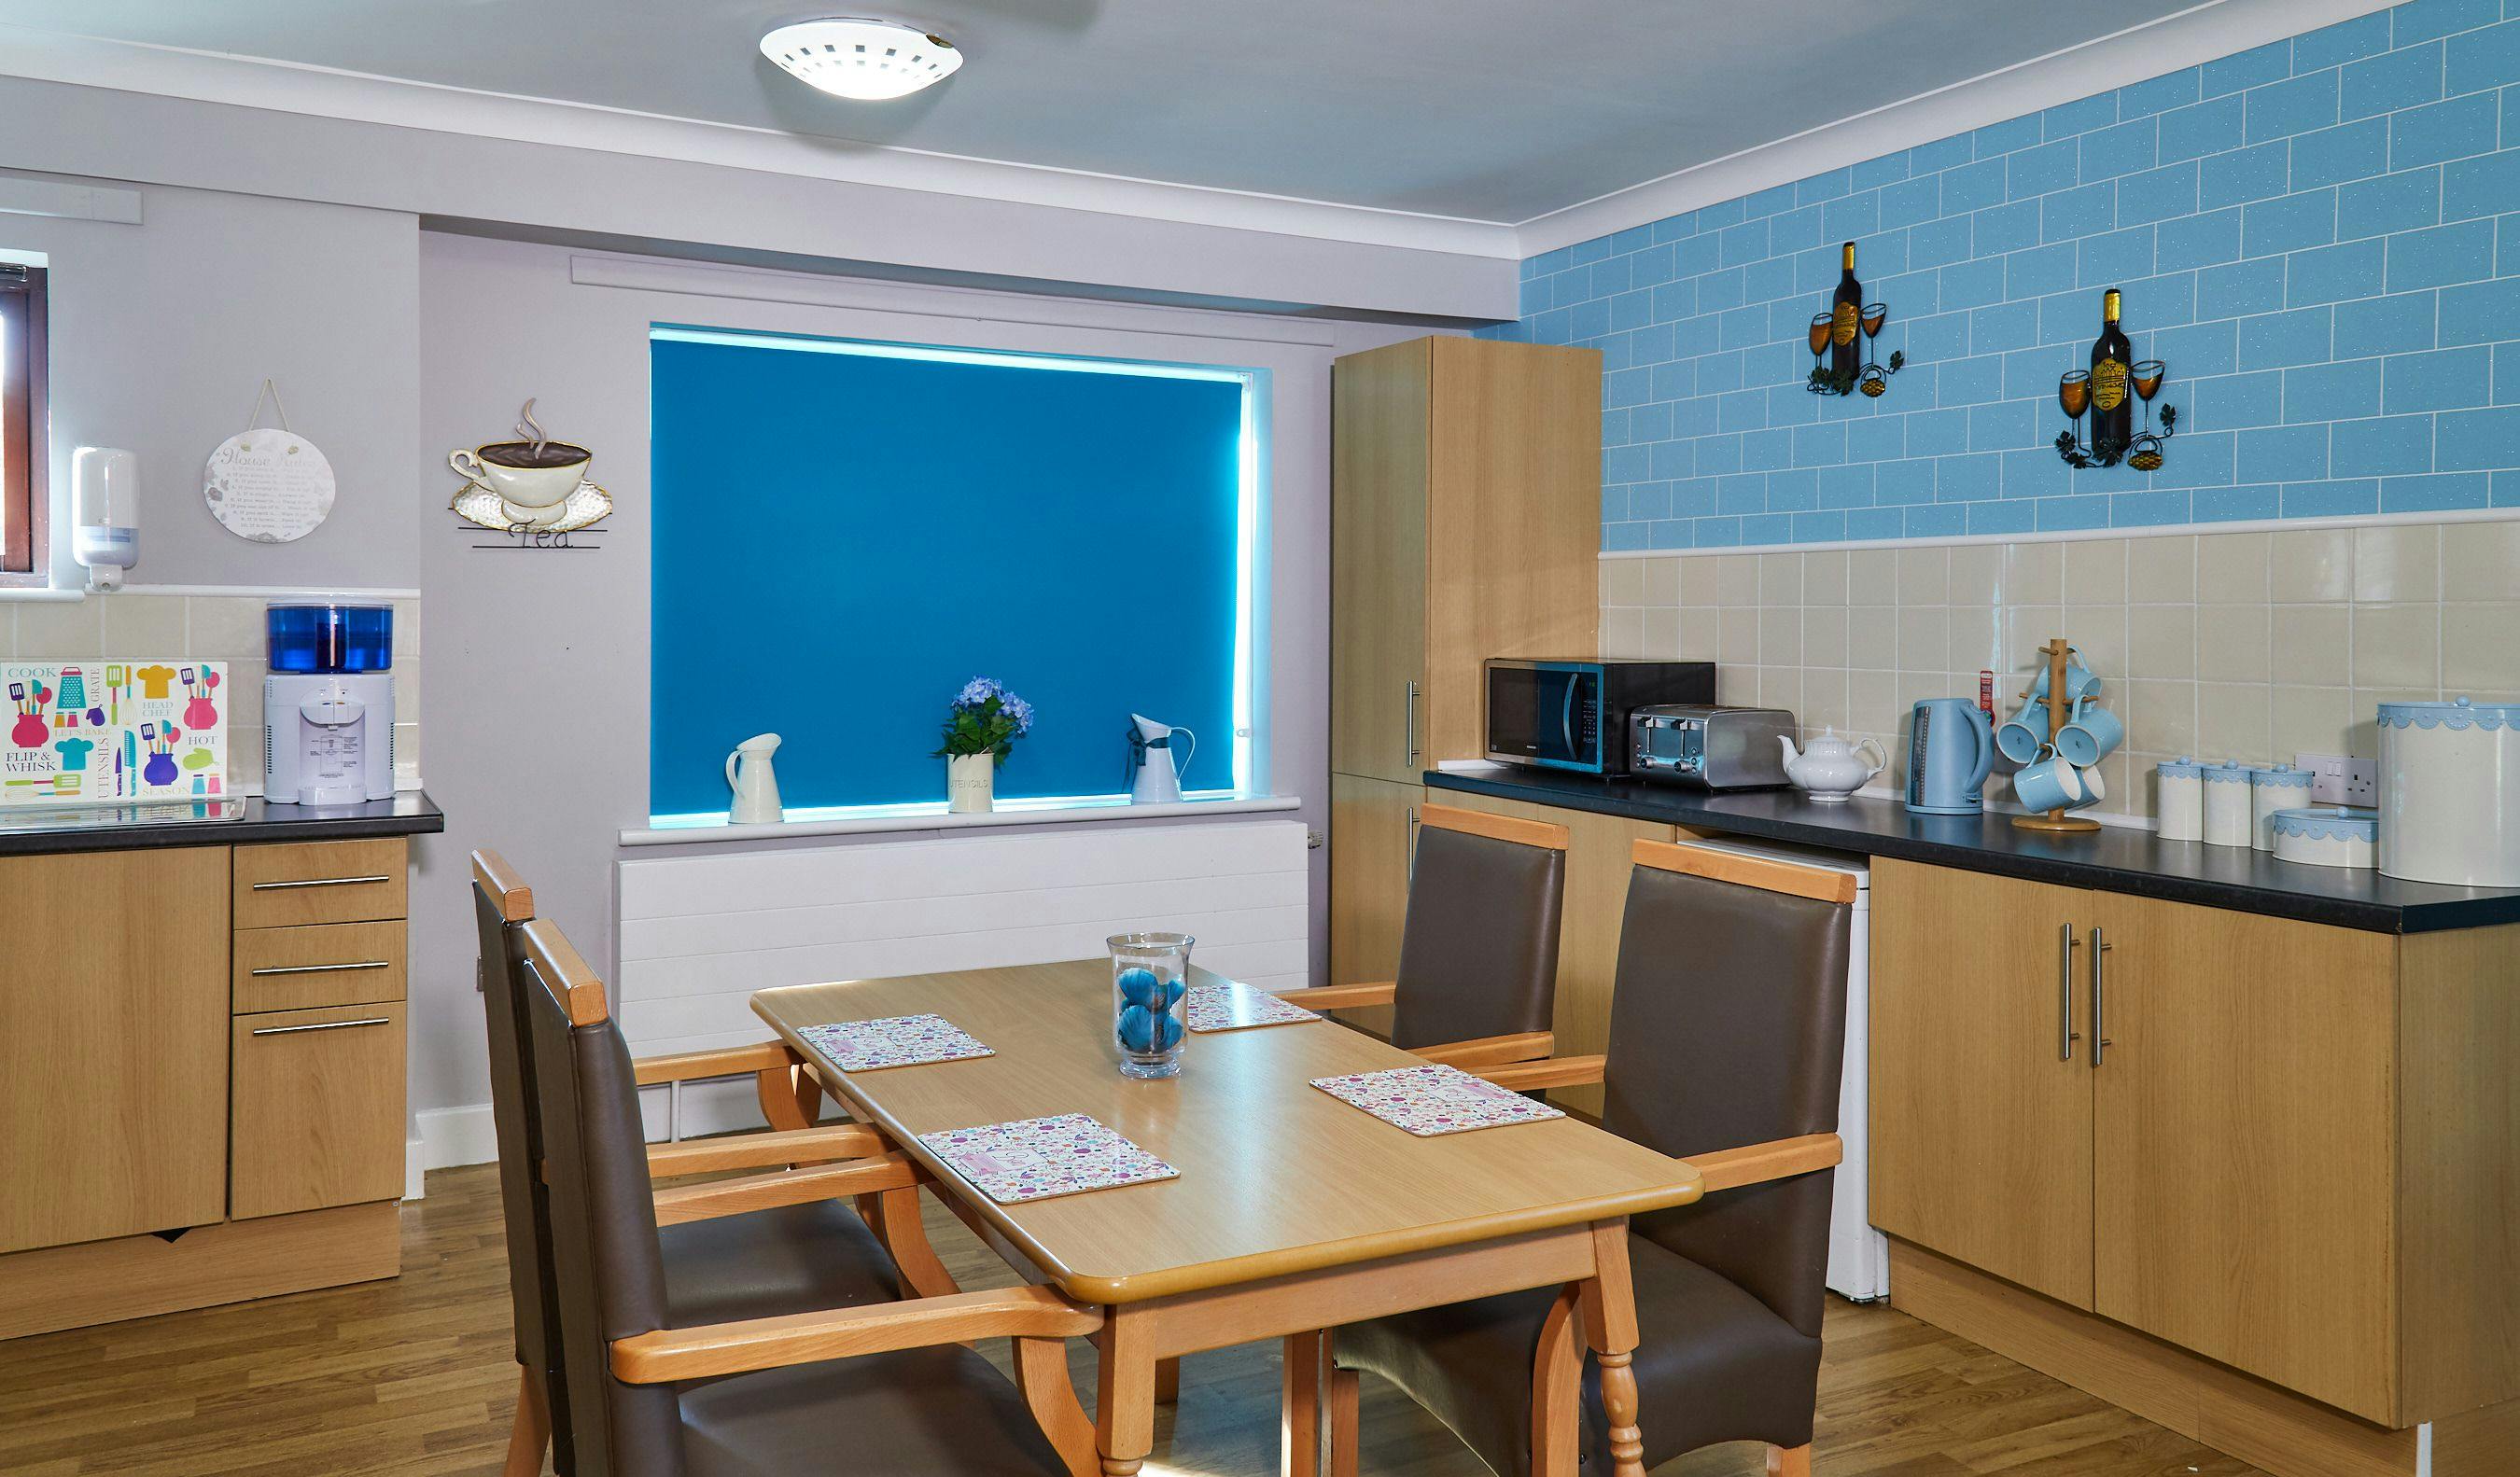 Kitchen of Newlands Care Home in Workington, Cumbria